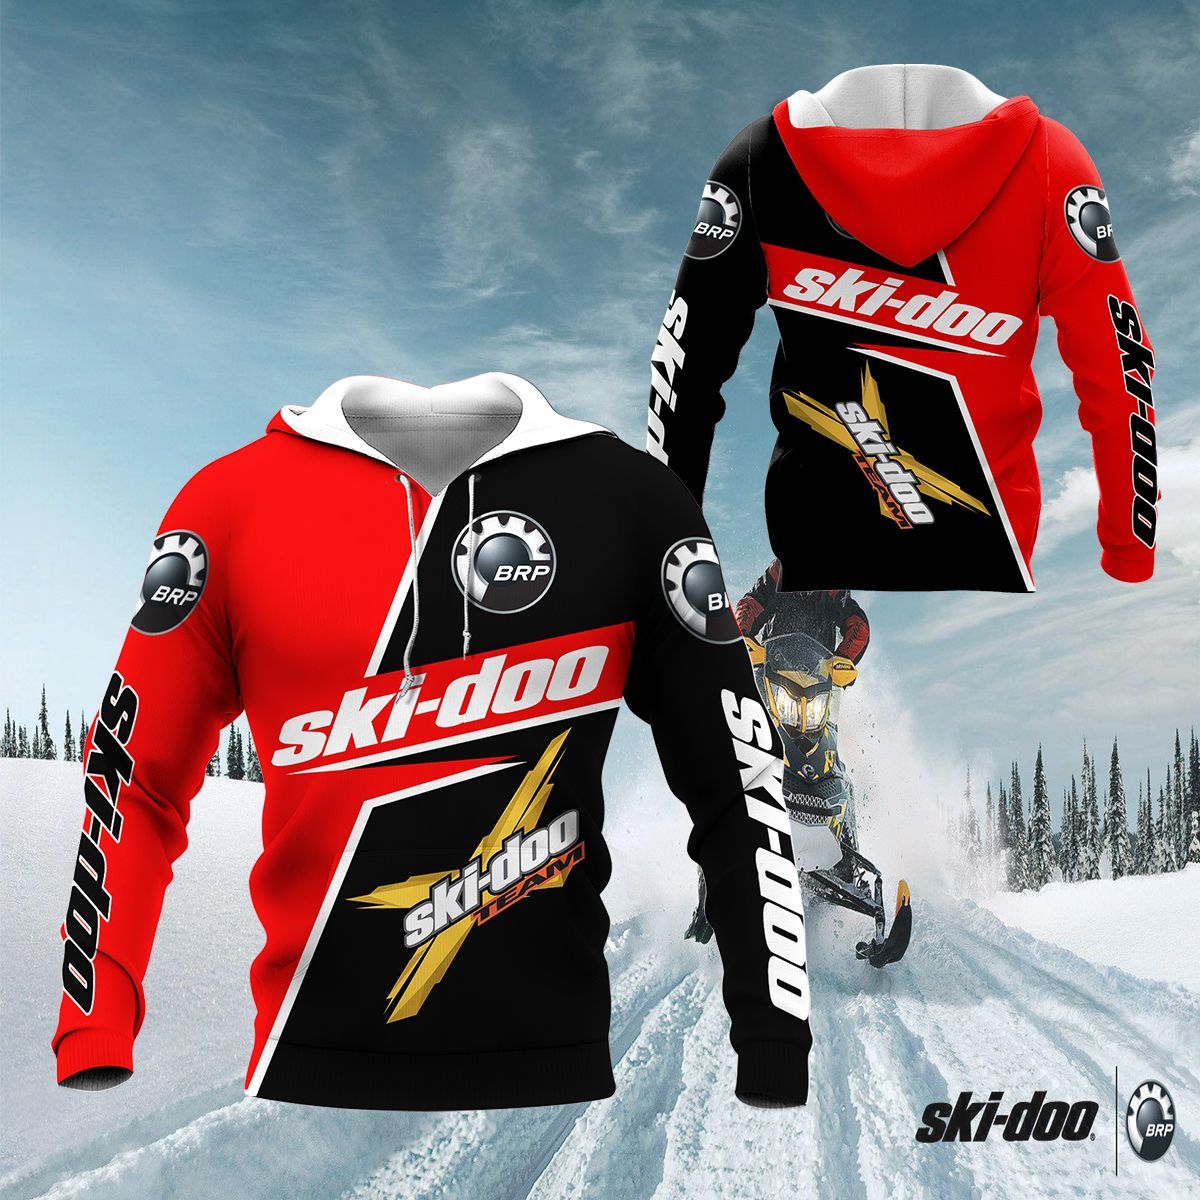 3D All Over Printed Ski-doo LPH-HA Shirts Ver 1 (Red)